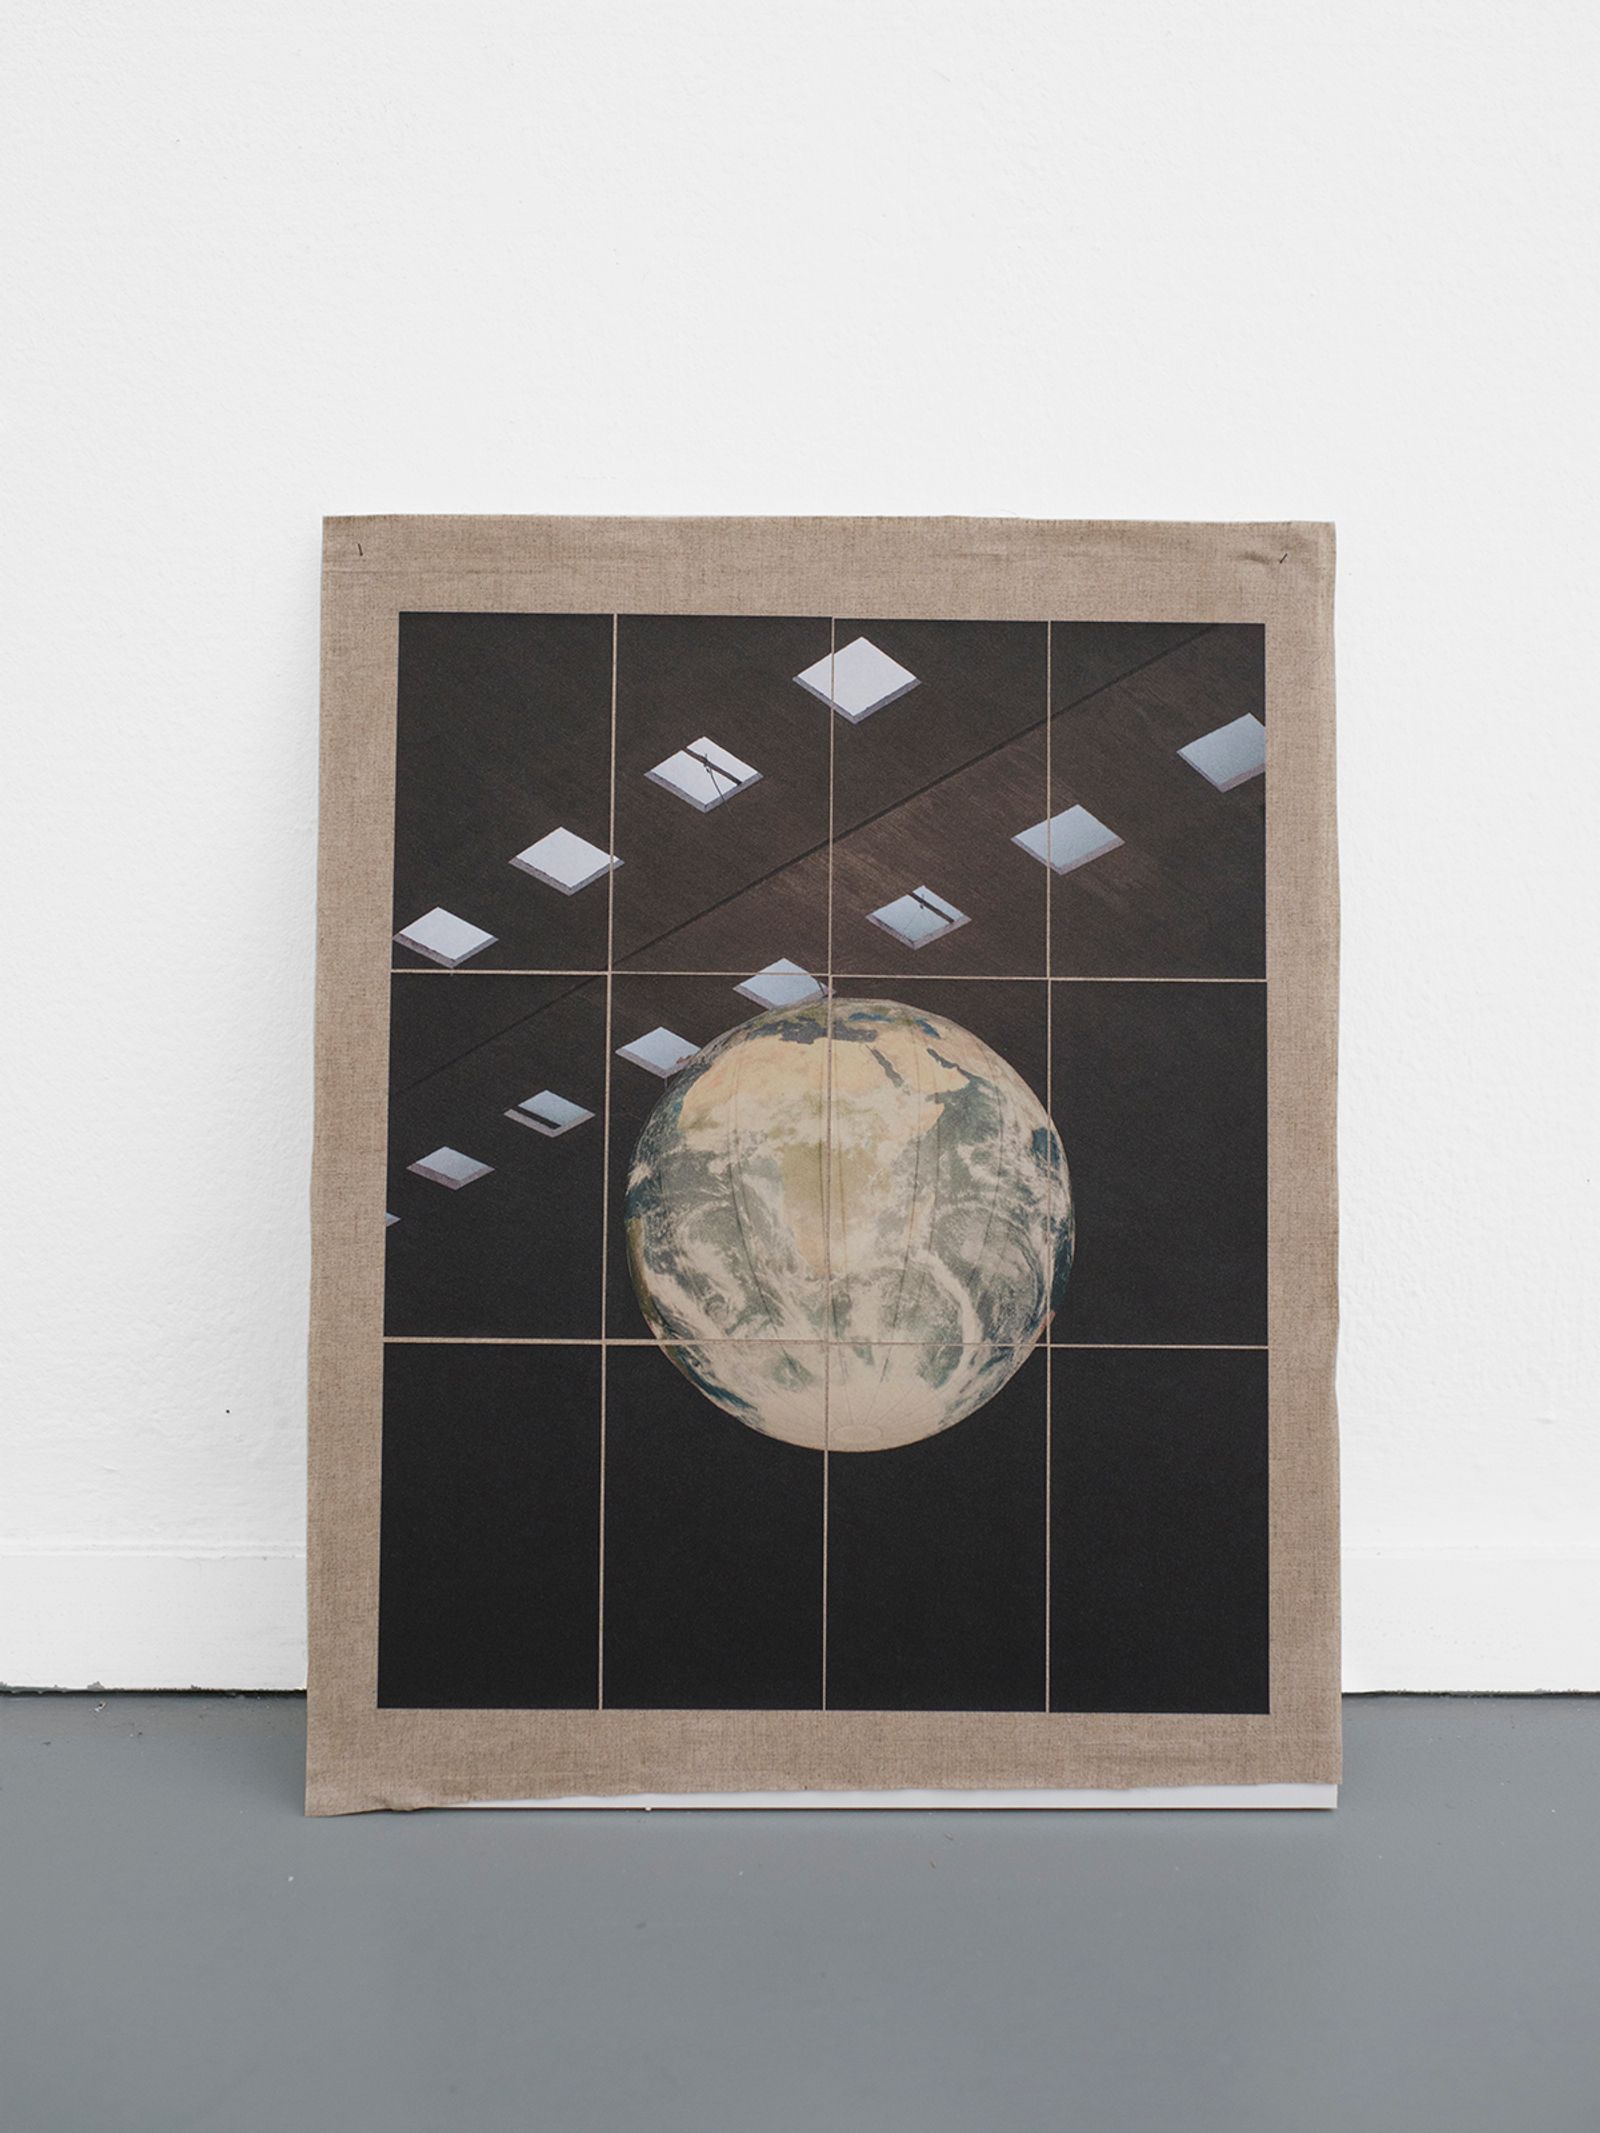 © Esther Hovers - Structures, Globe, 2019 58 x 46 cm / 22.8 x 18.1 in. Inkjet prints on Tosa Shi – 54 gsm, fixed on linen.